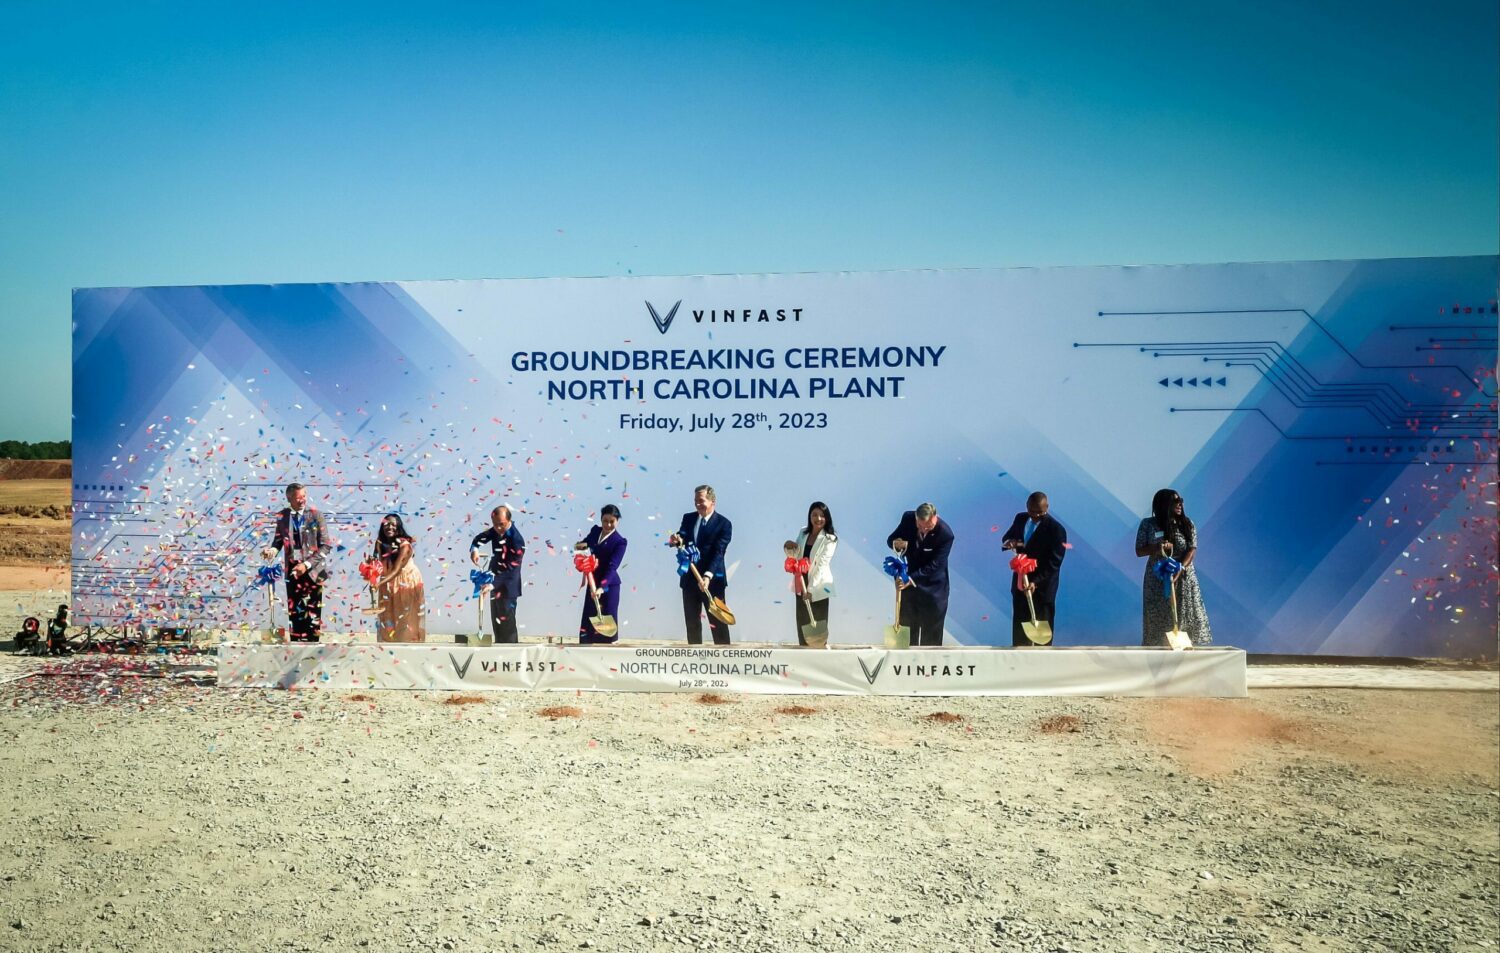 Vietnamese electric vehicle manufacturer VinFast officially broke ground on its first U.S. plant and plans to finish construction in 2025.